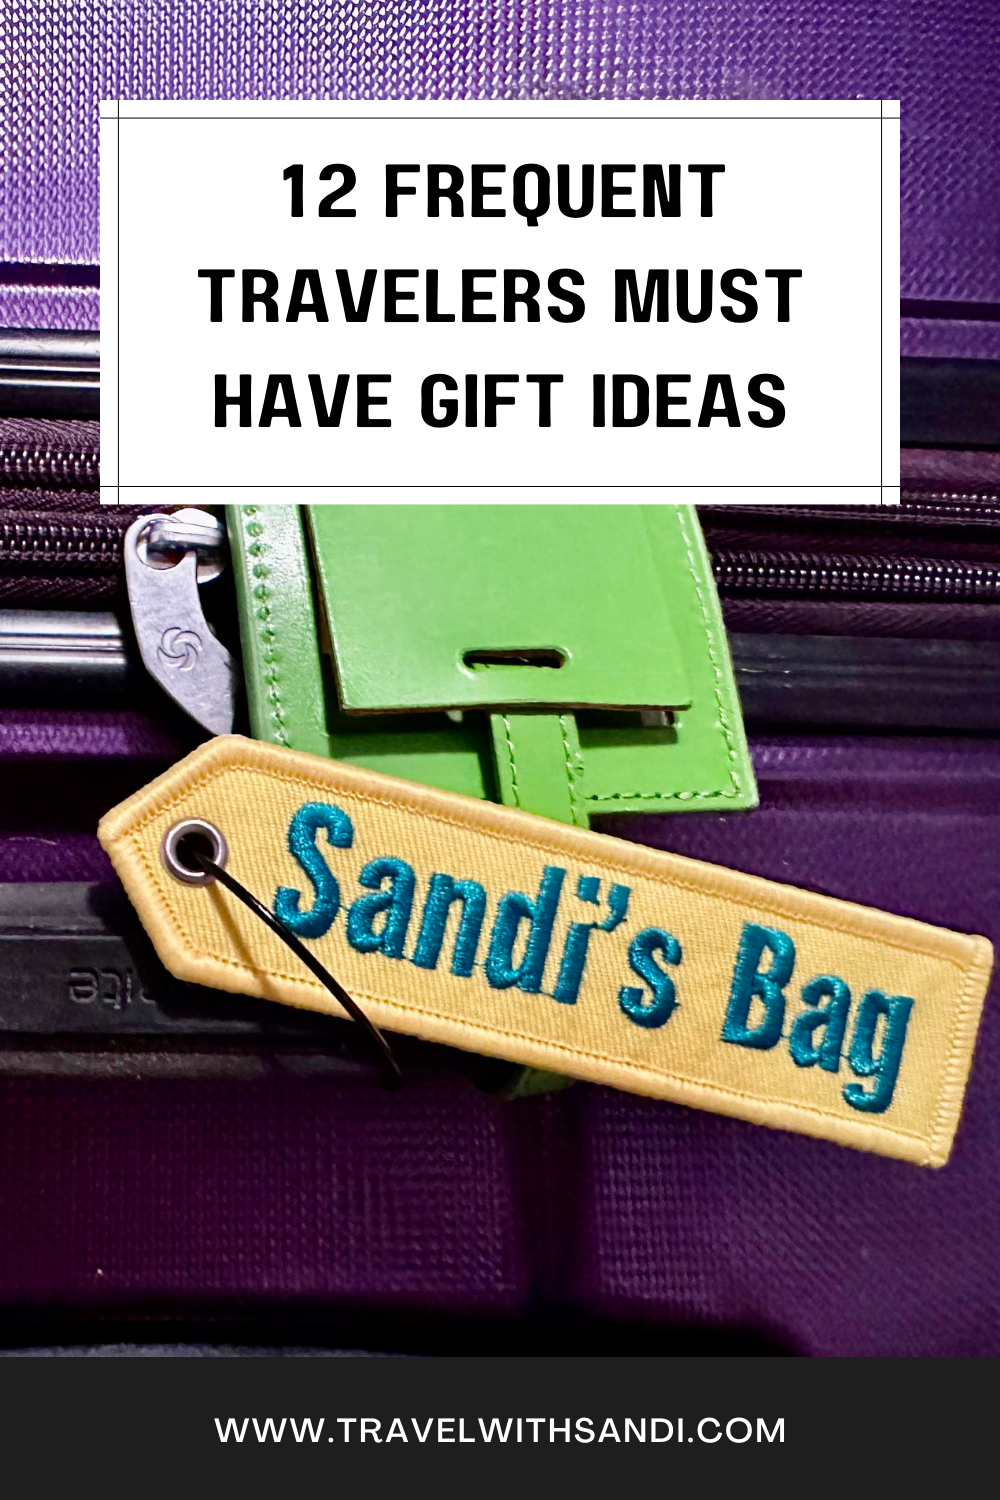 frequent travelers must have gift ideas